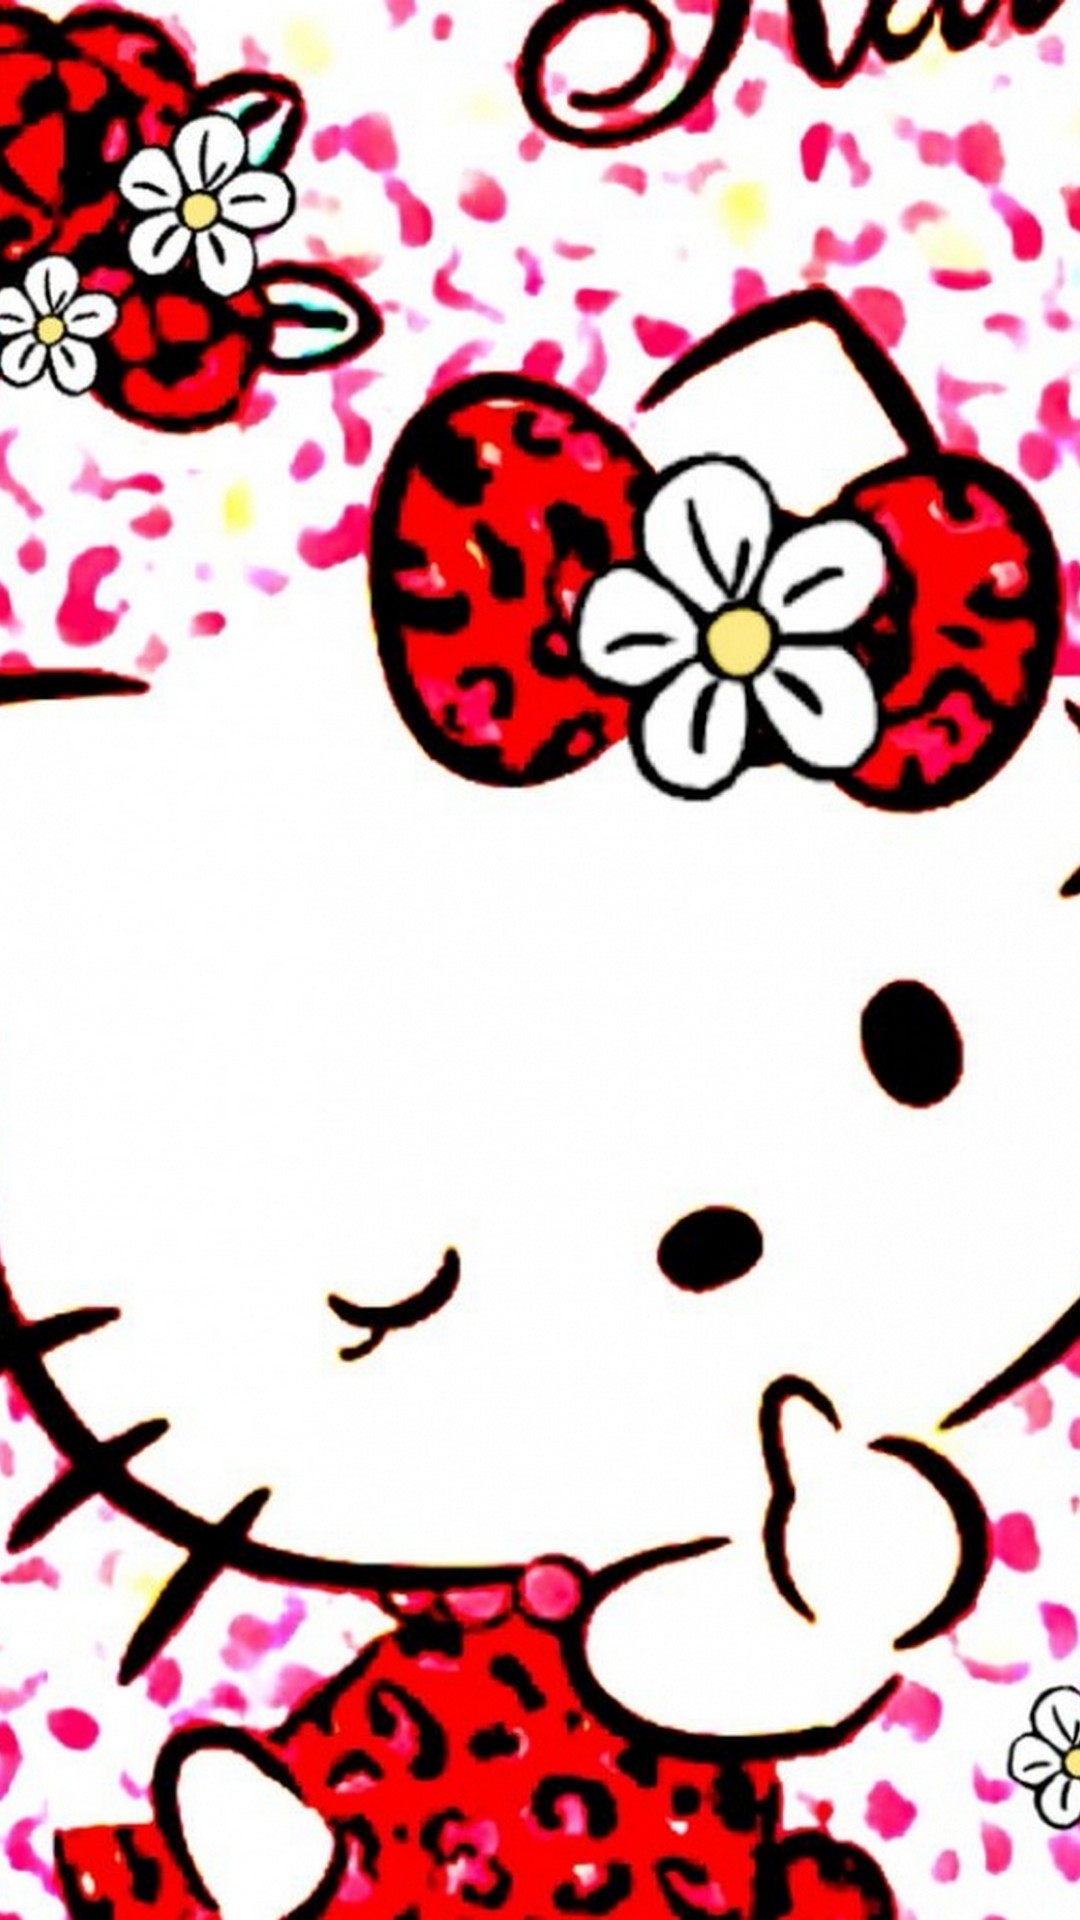 Wallpaper Hello Kitty Images Iphone With Image Resolution - Hello Kitty Black Red - HD Wallpaper 